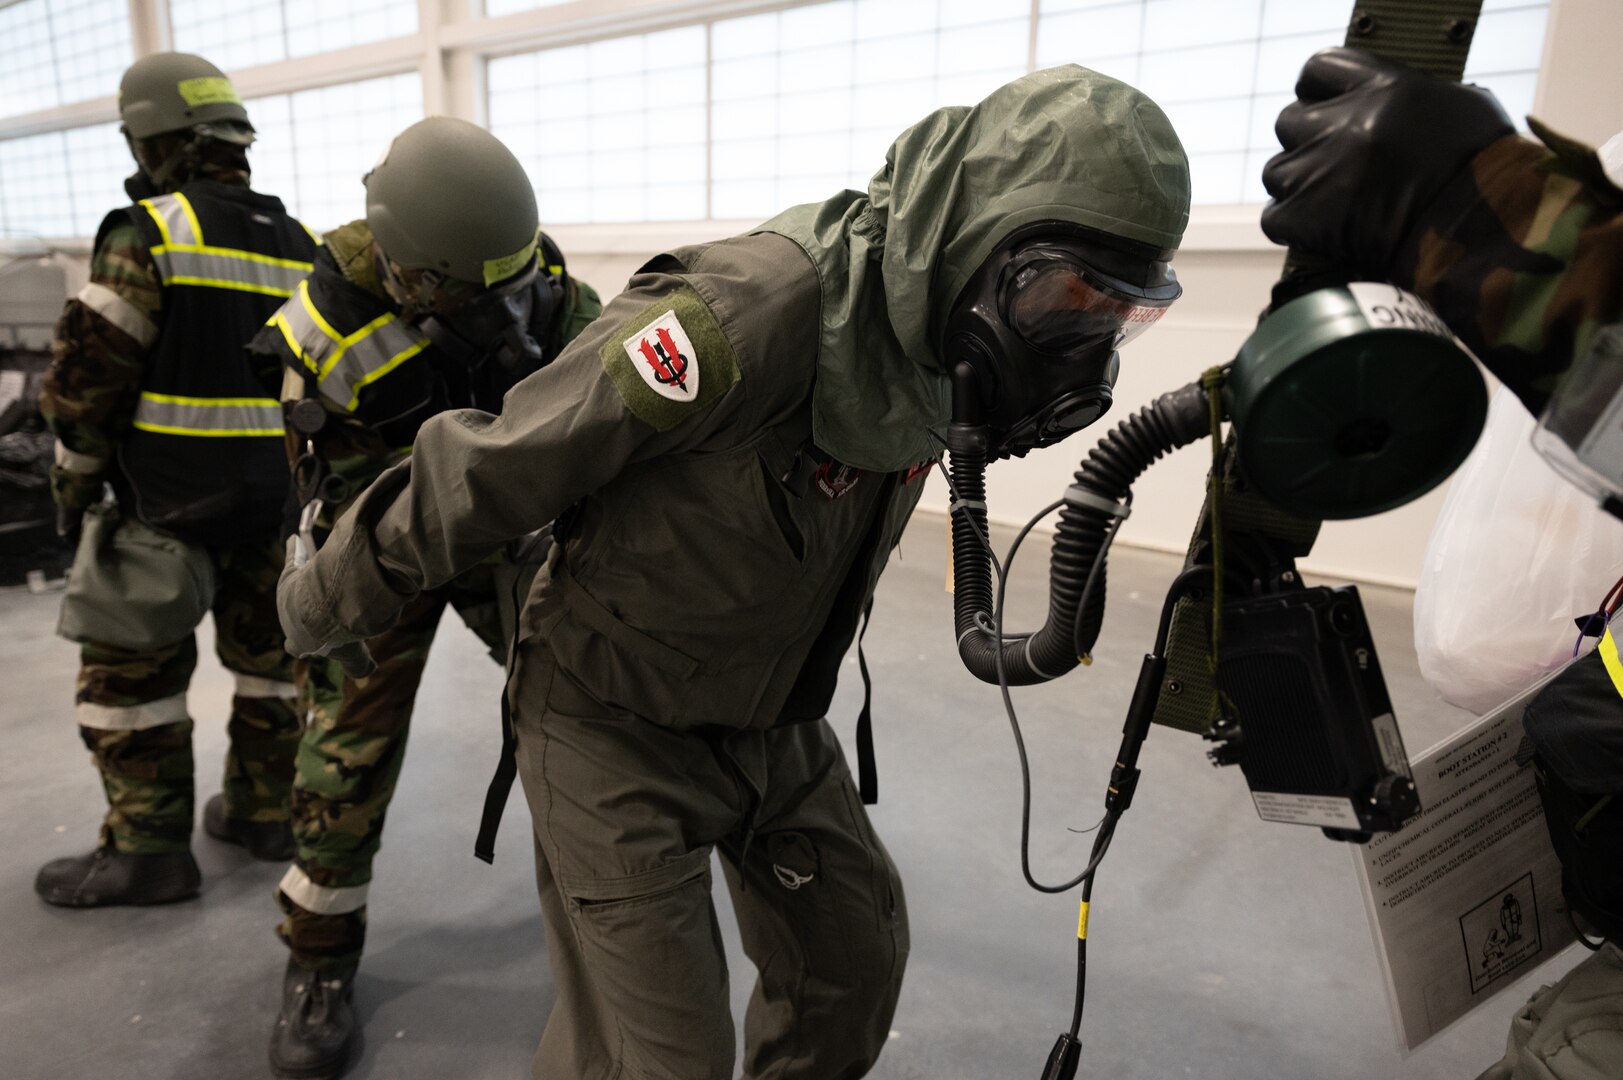 Airmen from the 155th Air Refueling Wing perform a simulated uniform decontamination of their specialized suit as part of the Mission-Oriented Protective Postures gear during a large-scale readiness exercise Feb. 4, 2024, on National Guard airbase in Lincoln, Nebraska.